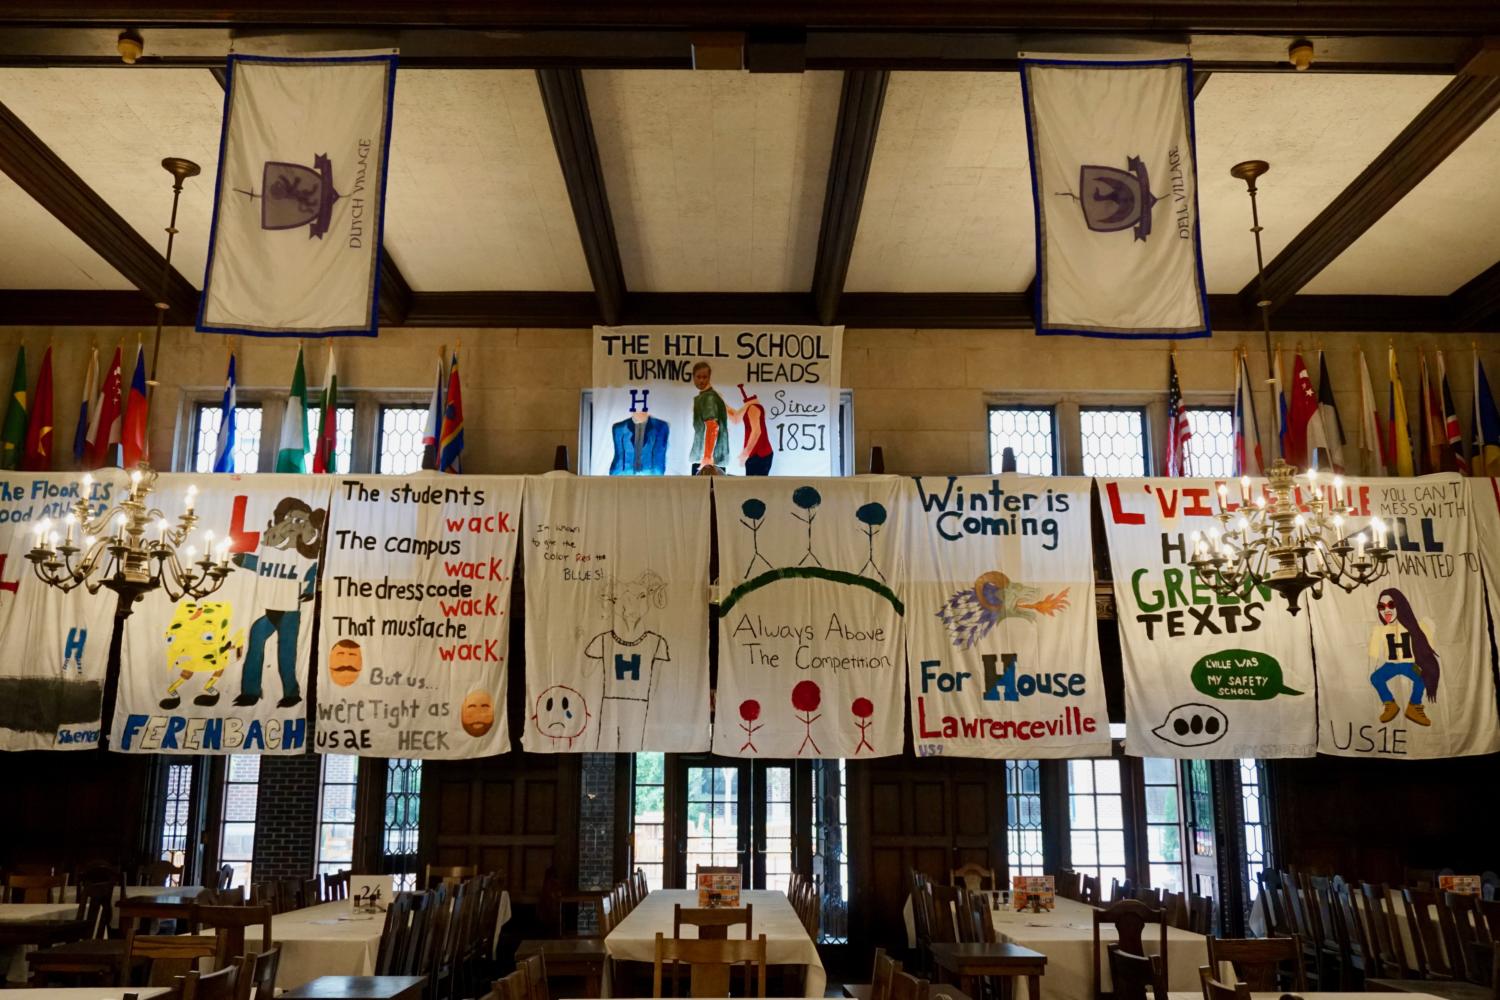 The dorm banners for the 2017 Lawrenceville Weekend are currently hanging in the Dining Hall. Photo by Chloe Garton 18